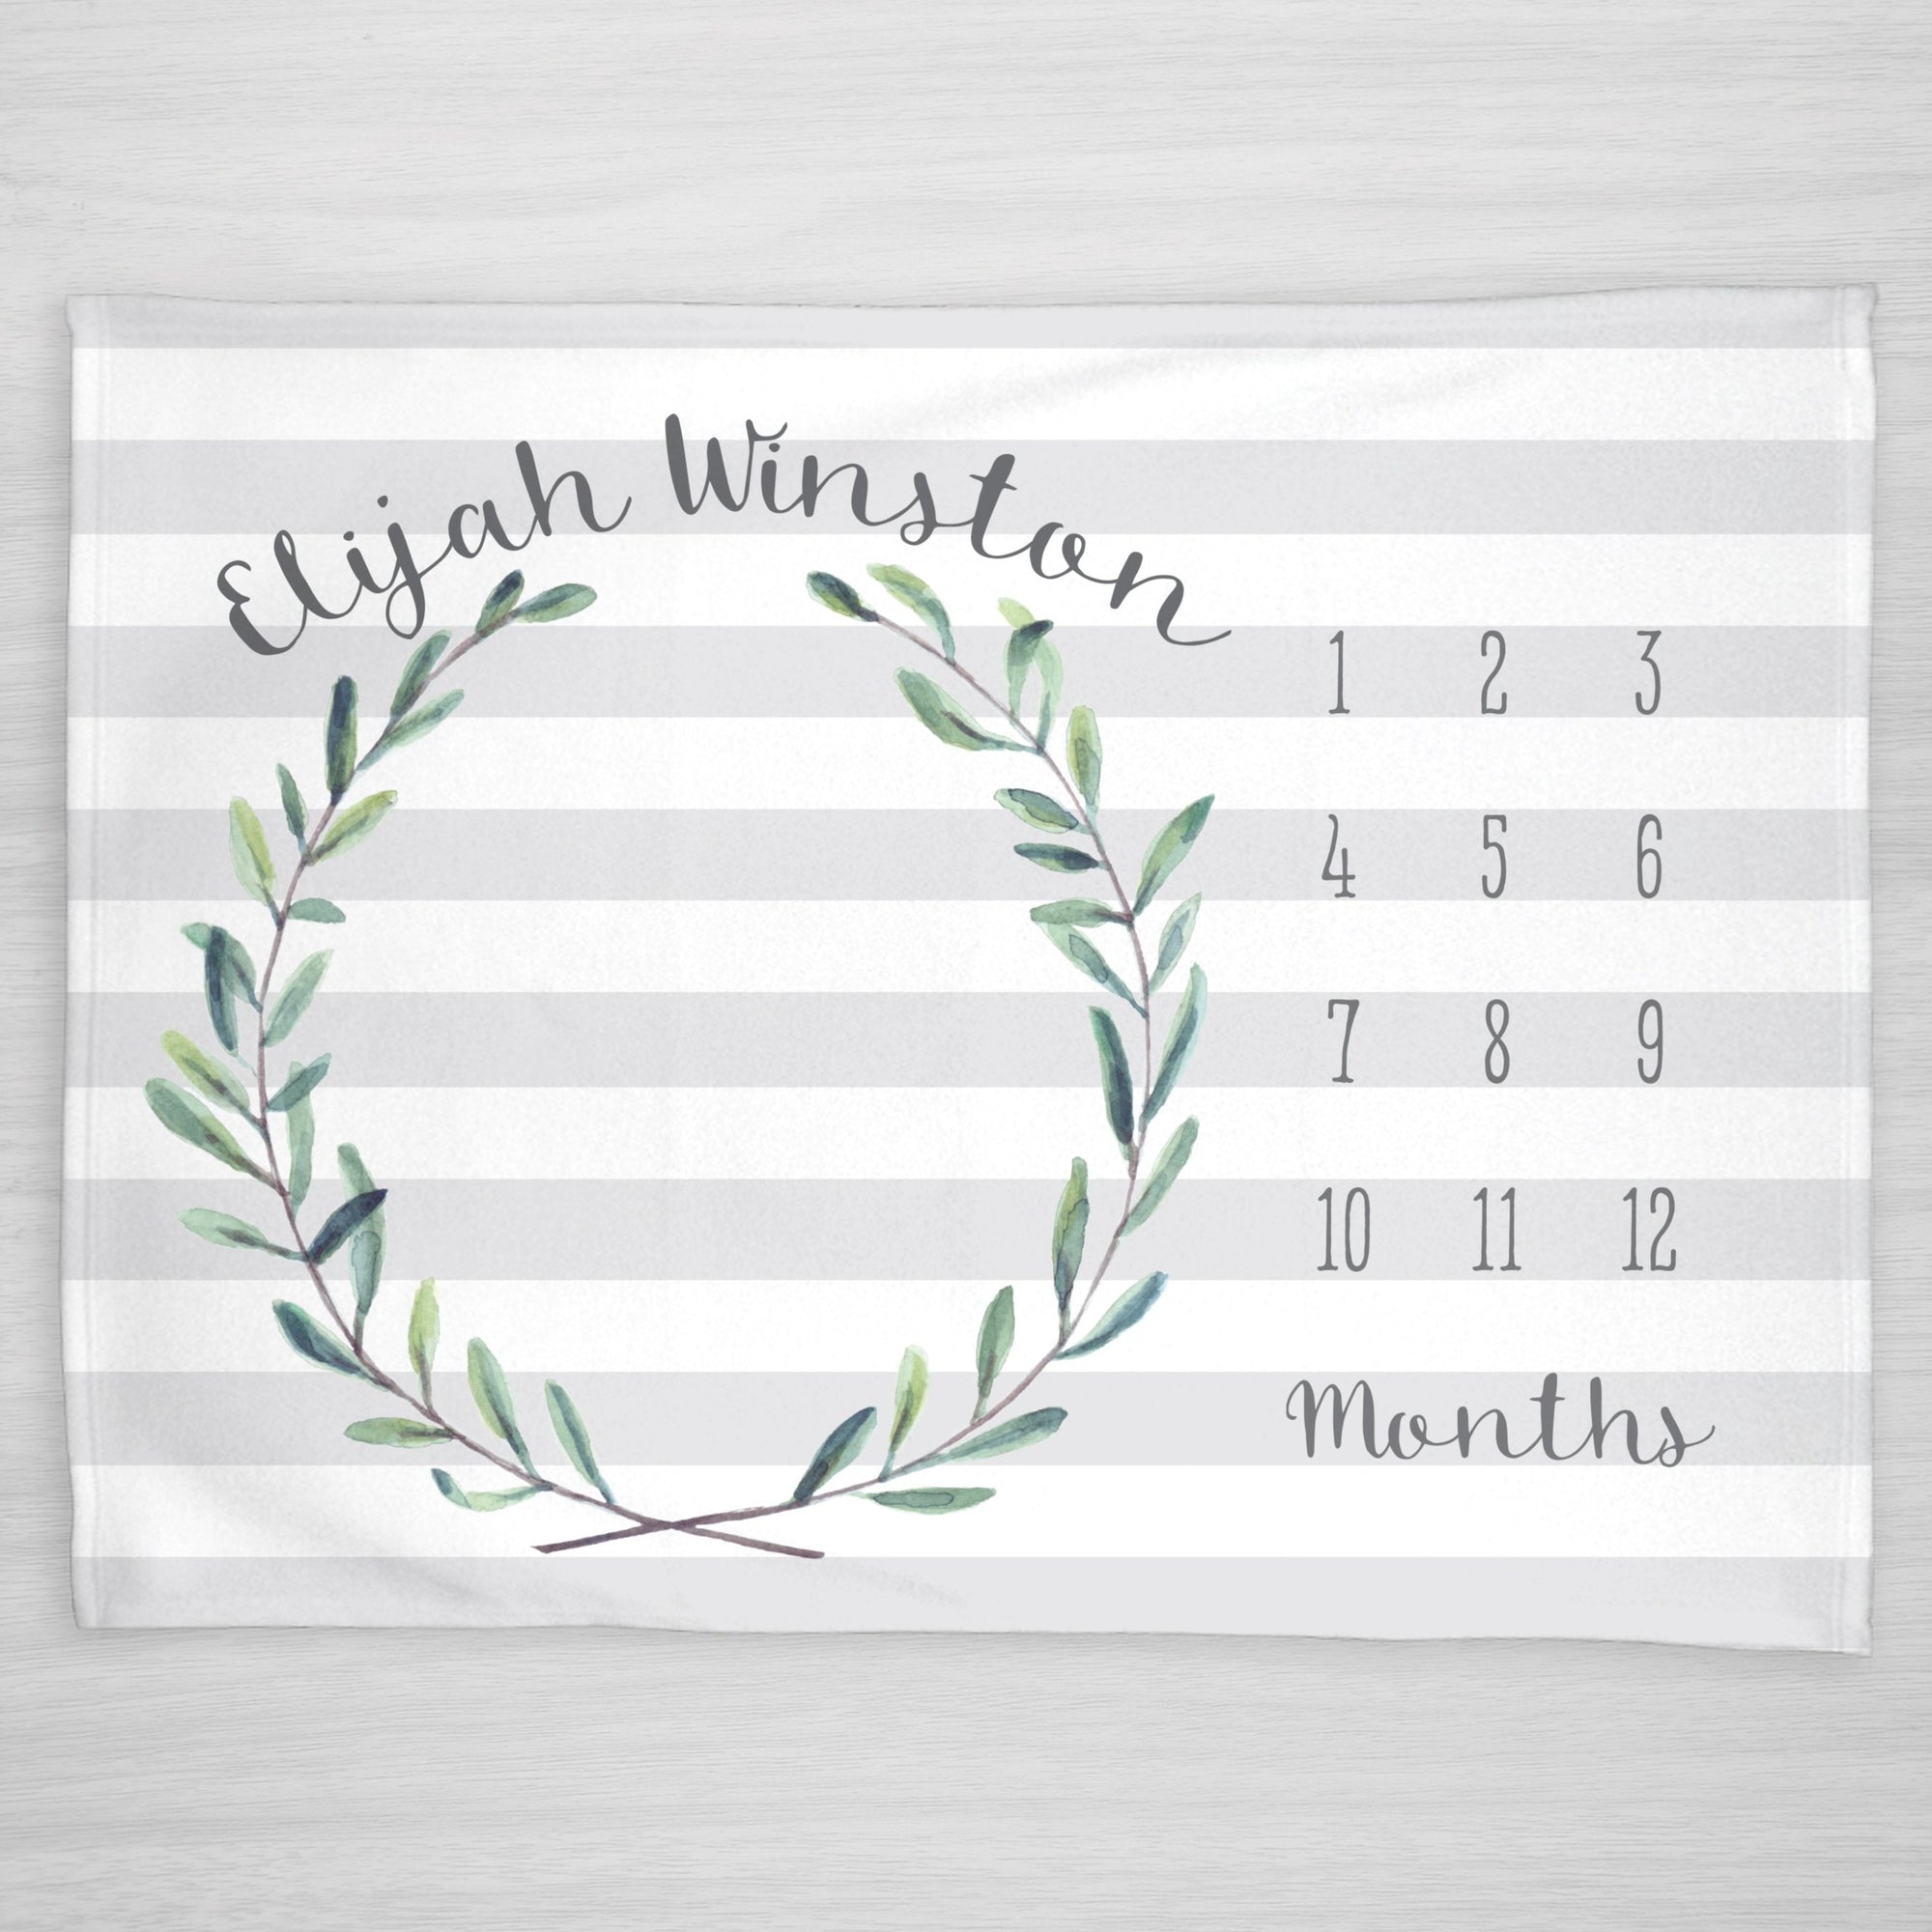 Gender Neutral Milestone Blanket, Personalized with Baby's name, featuring a classic green leaf wreath and gray stripes